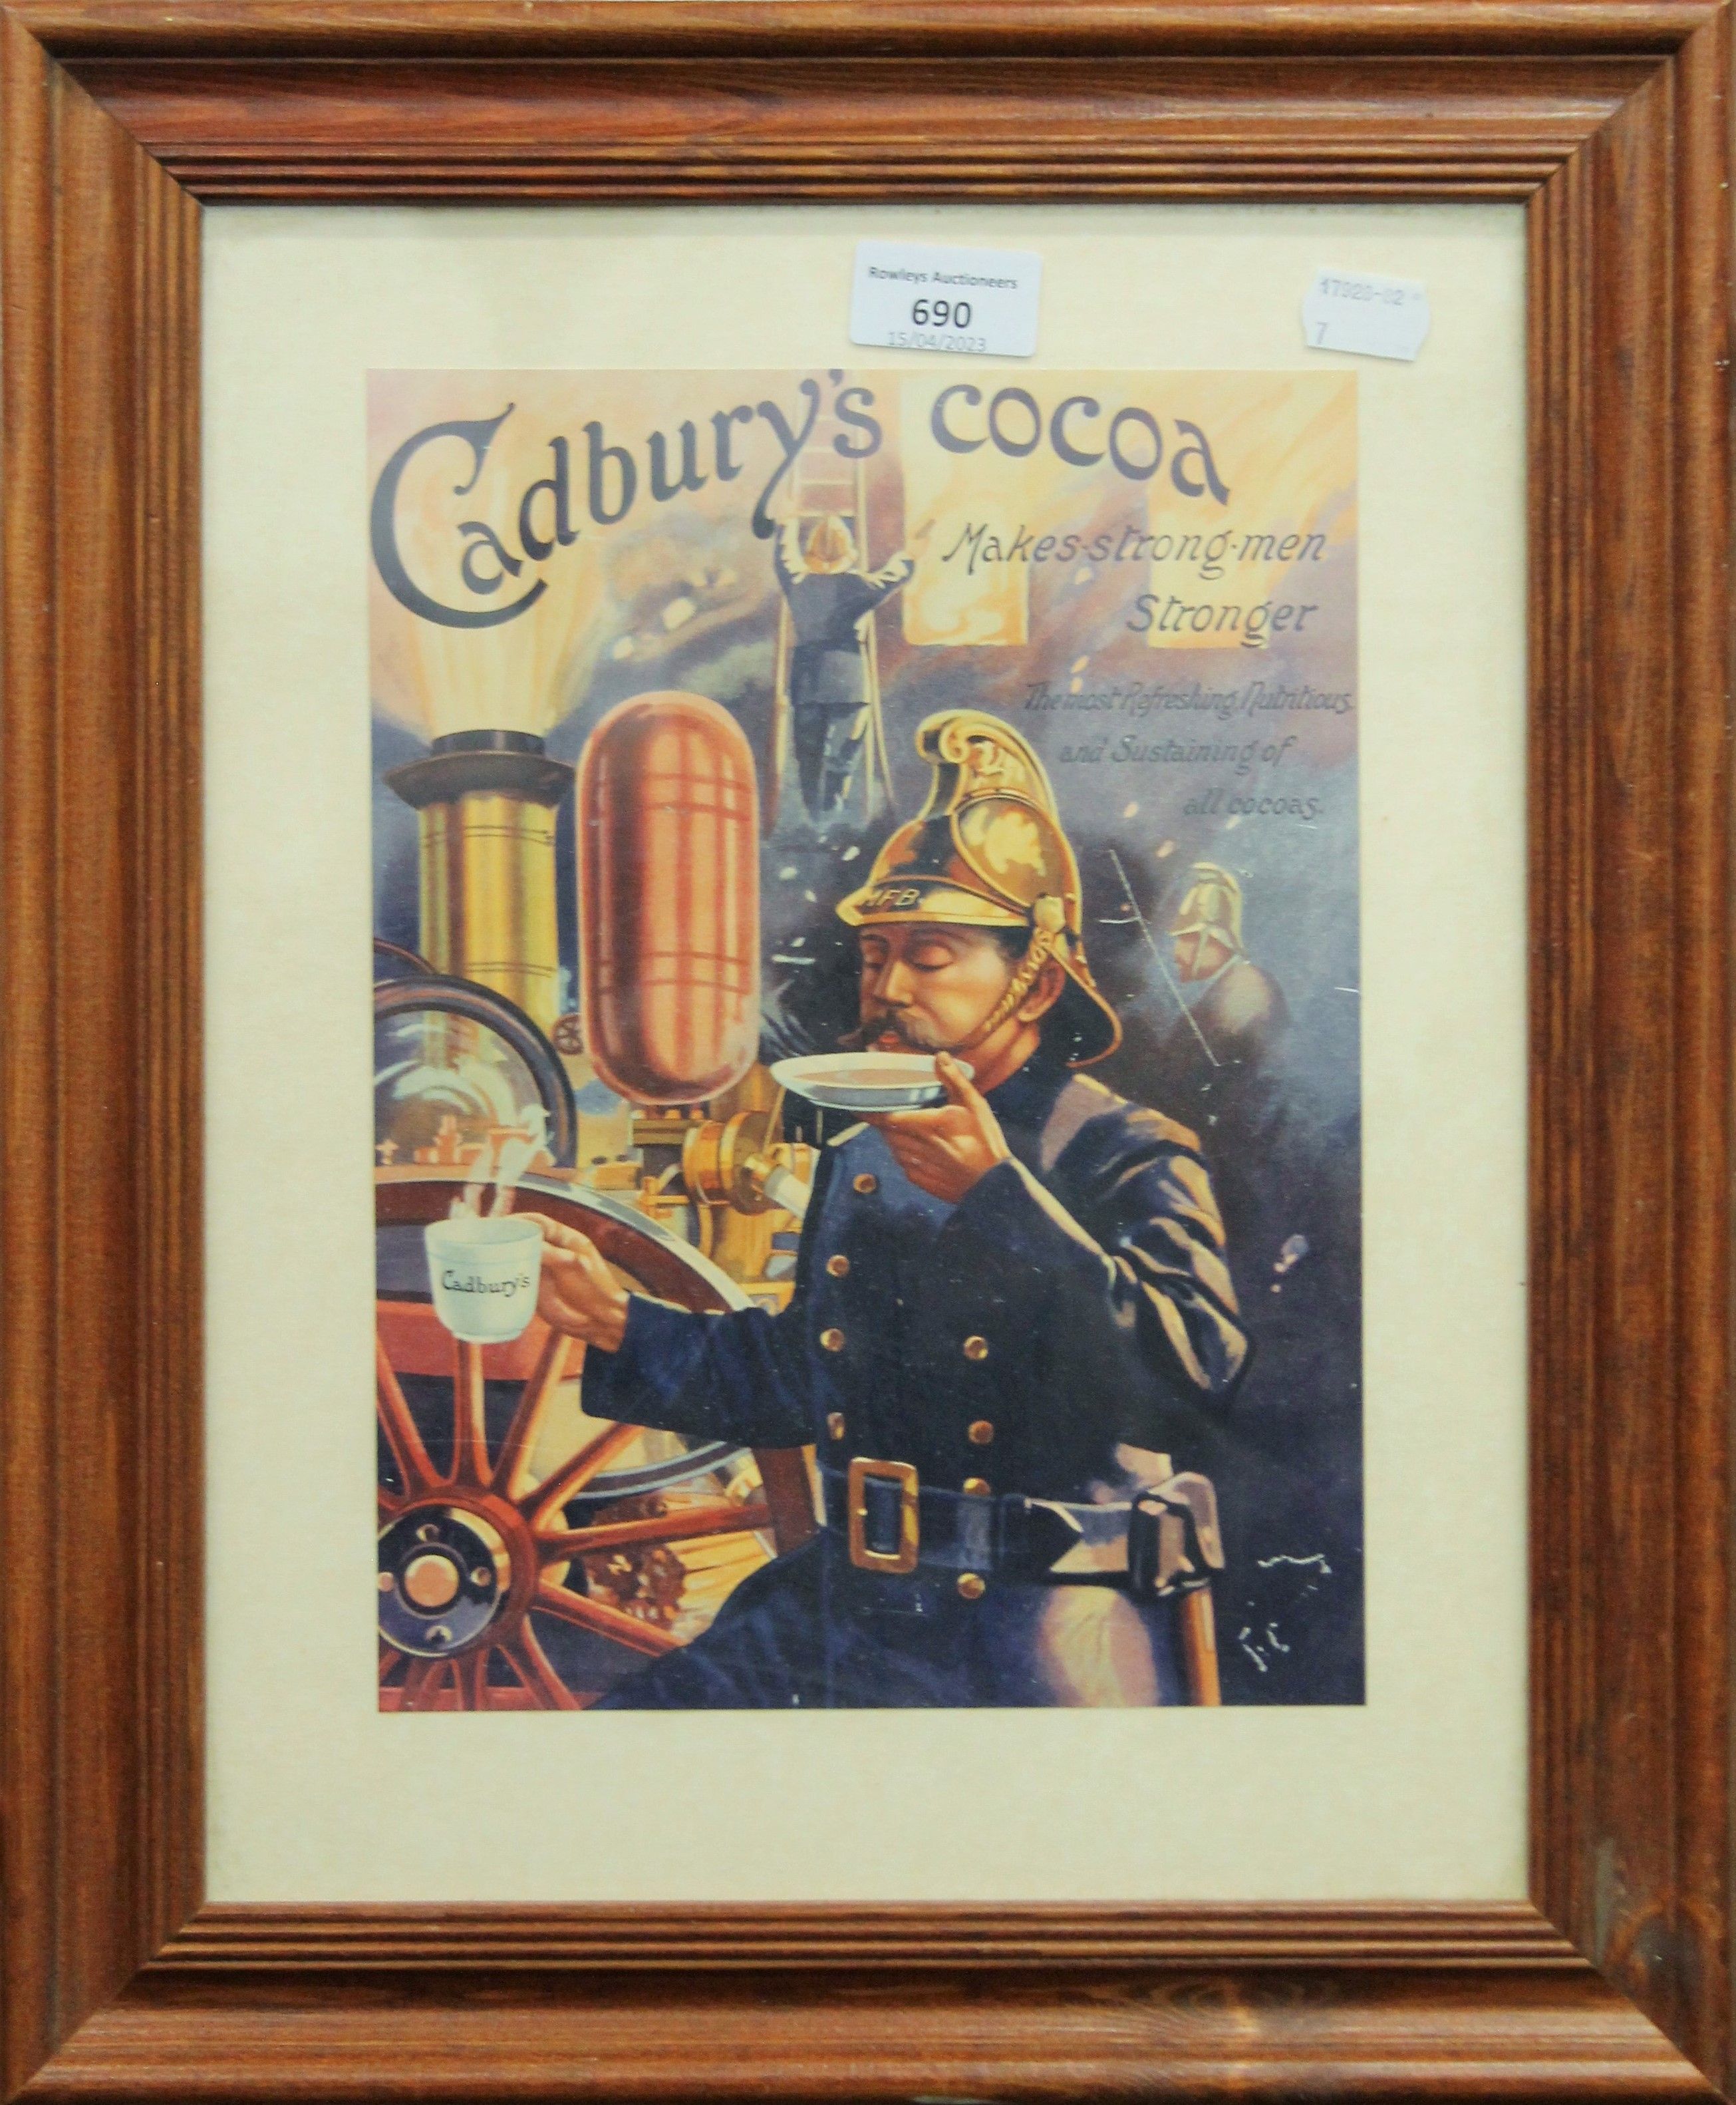 Two framed prints of adverts for Cadbury's Coco and Pears' Soap. The former 35.5 x 43 cm overall. - Image 2 of 4